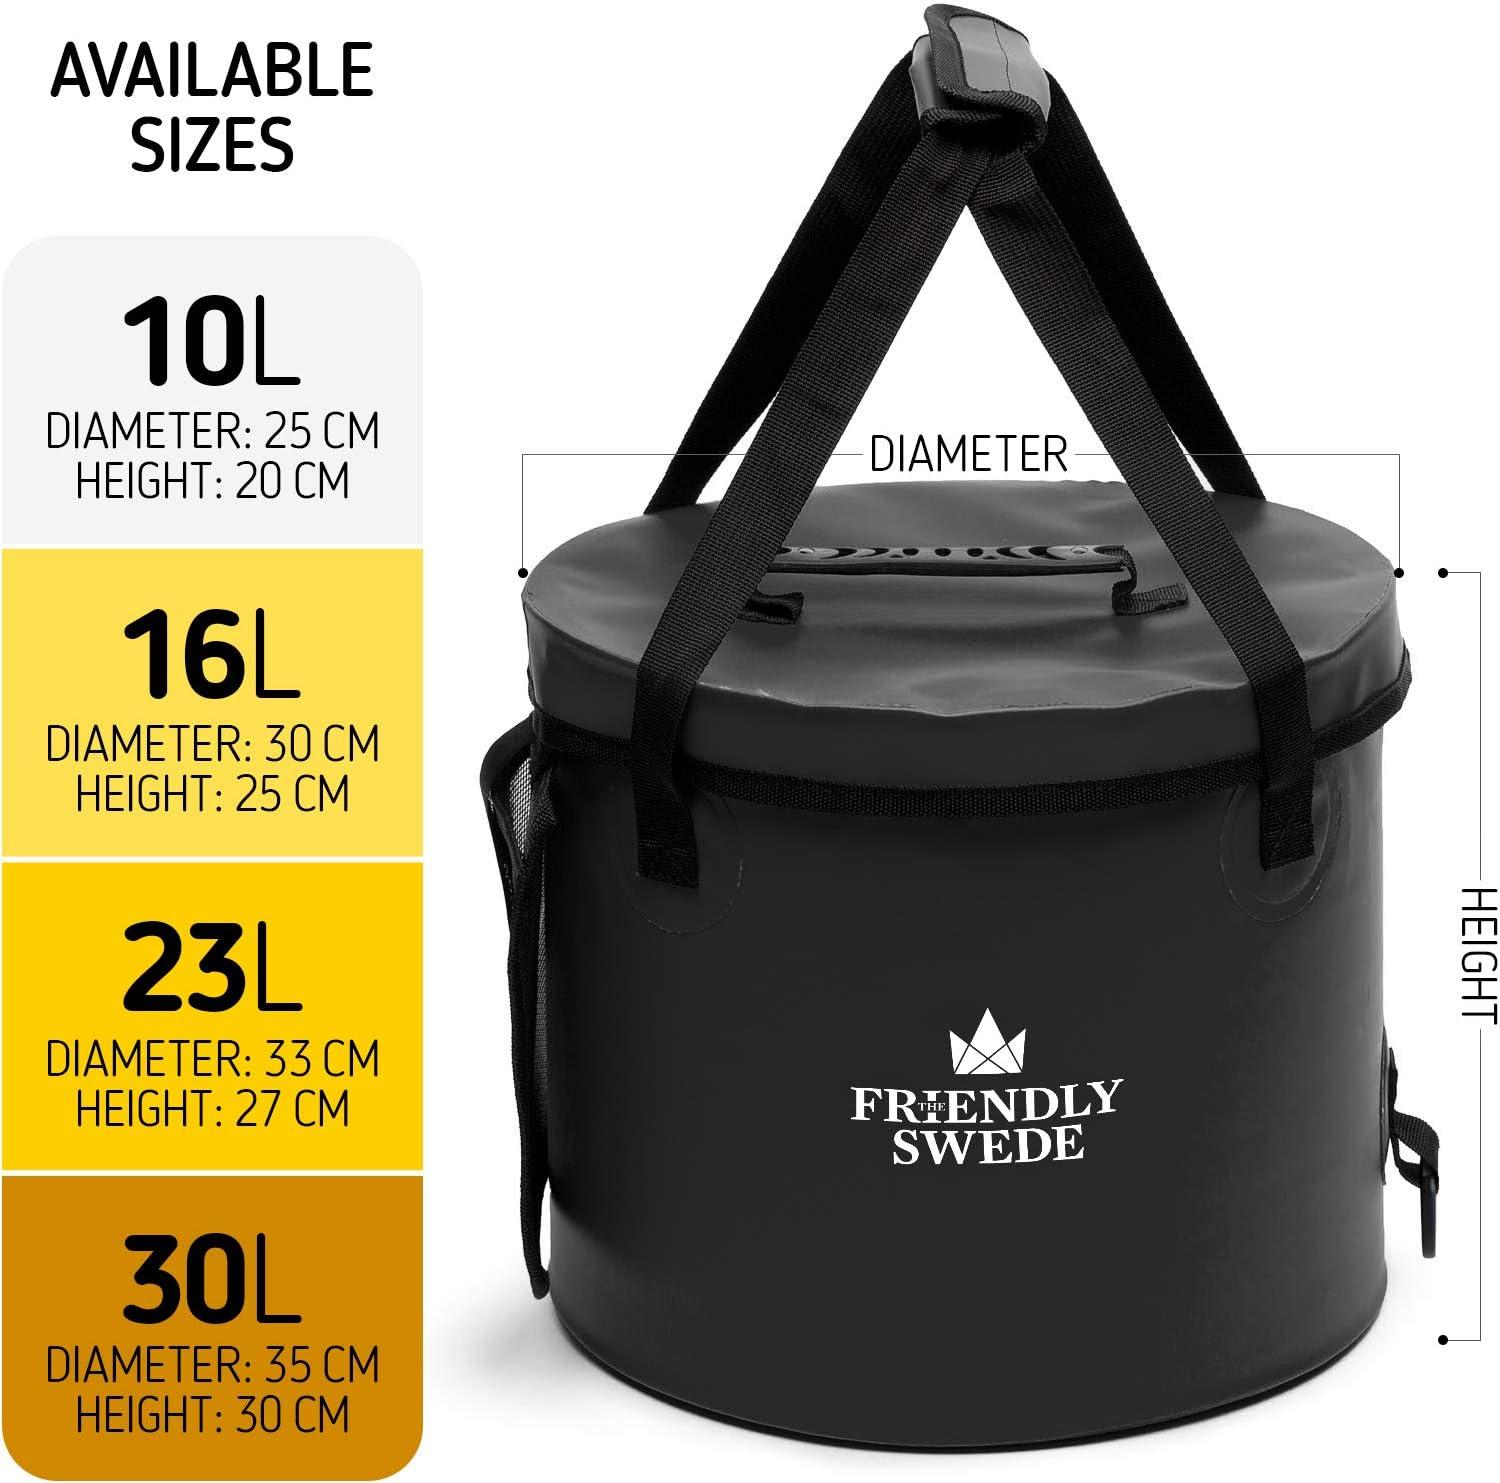 The Friendly Swede Collapsible Bucket with Lid, Folding Bucket for Camping,  Travel & Gardening, Portable Water Bucket w/a Handy Tool Mesh Pocket,  Collapsible Water Container, Camping Water Container Black 16L (4.23 gal)